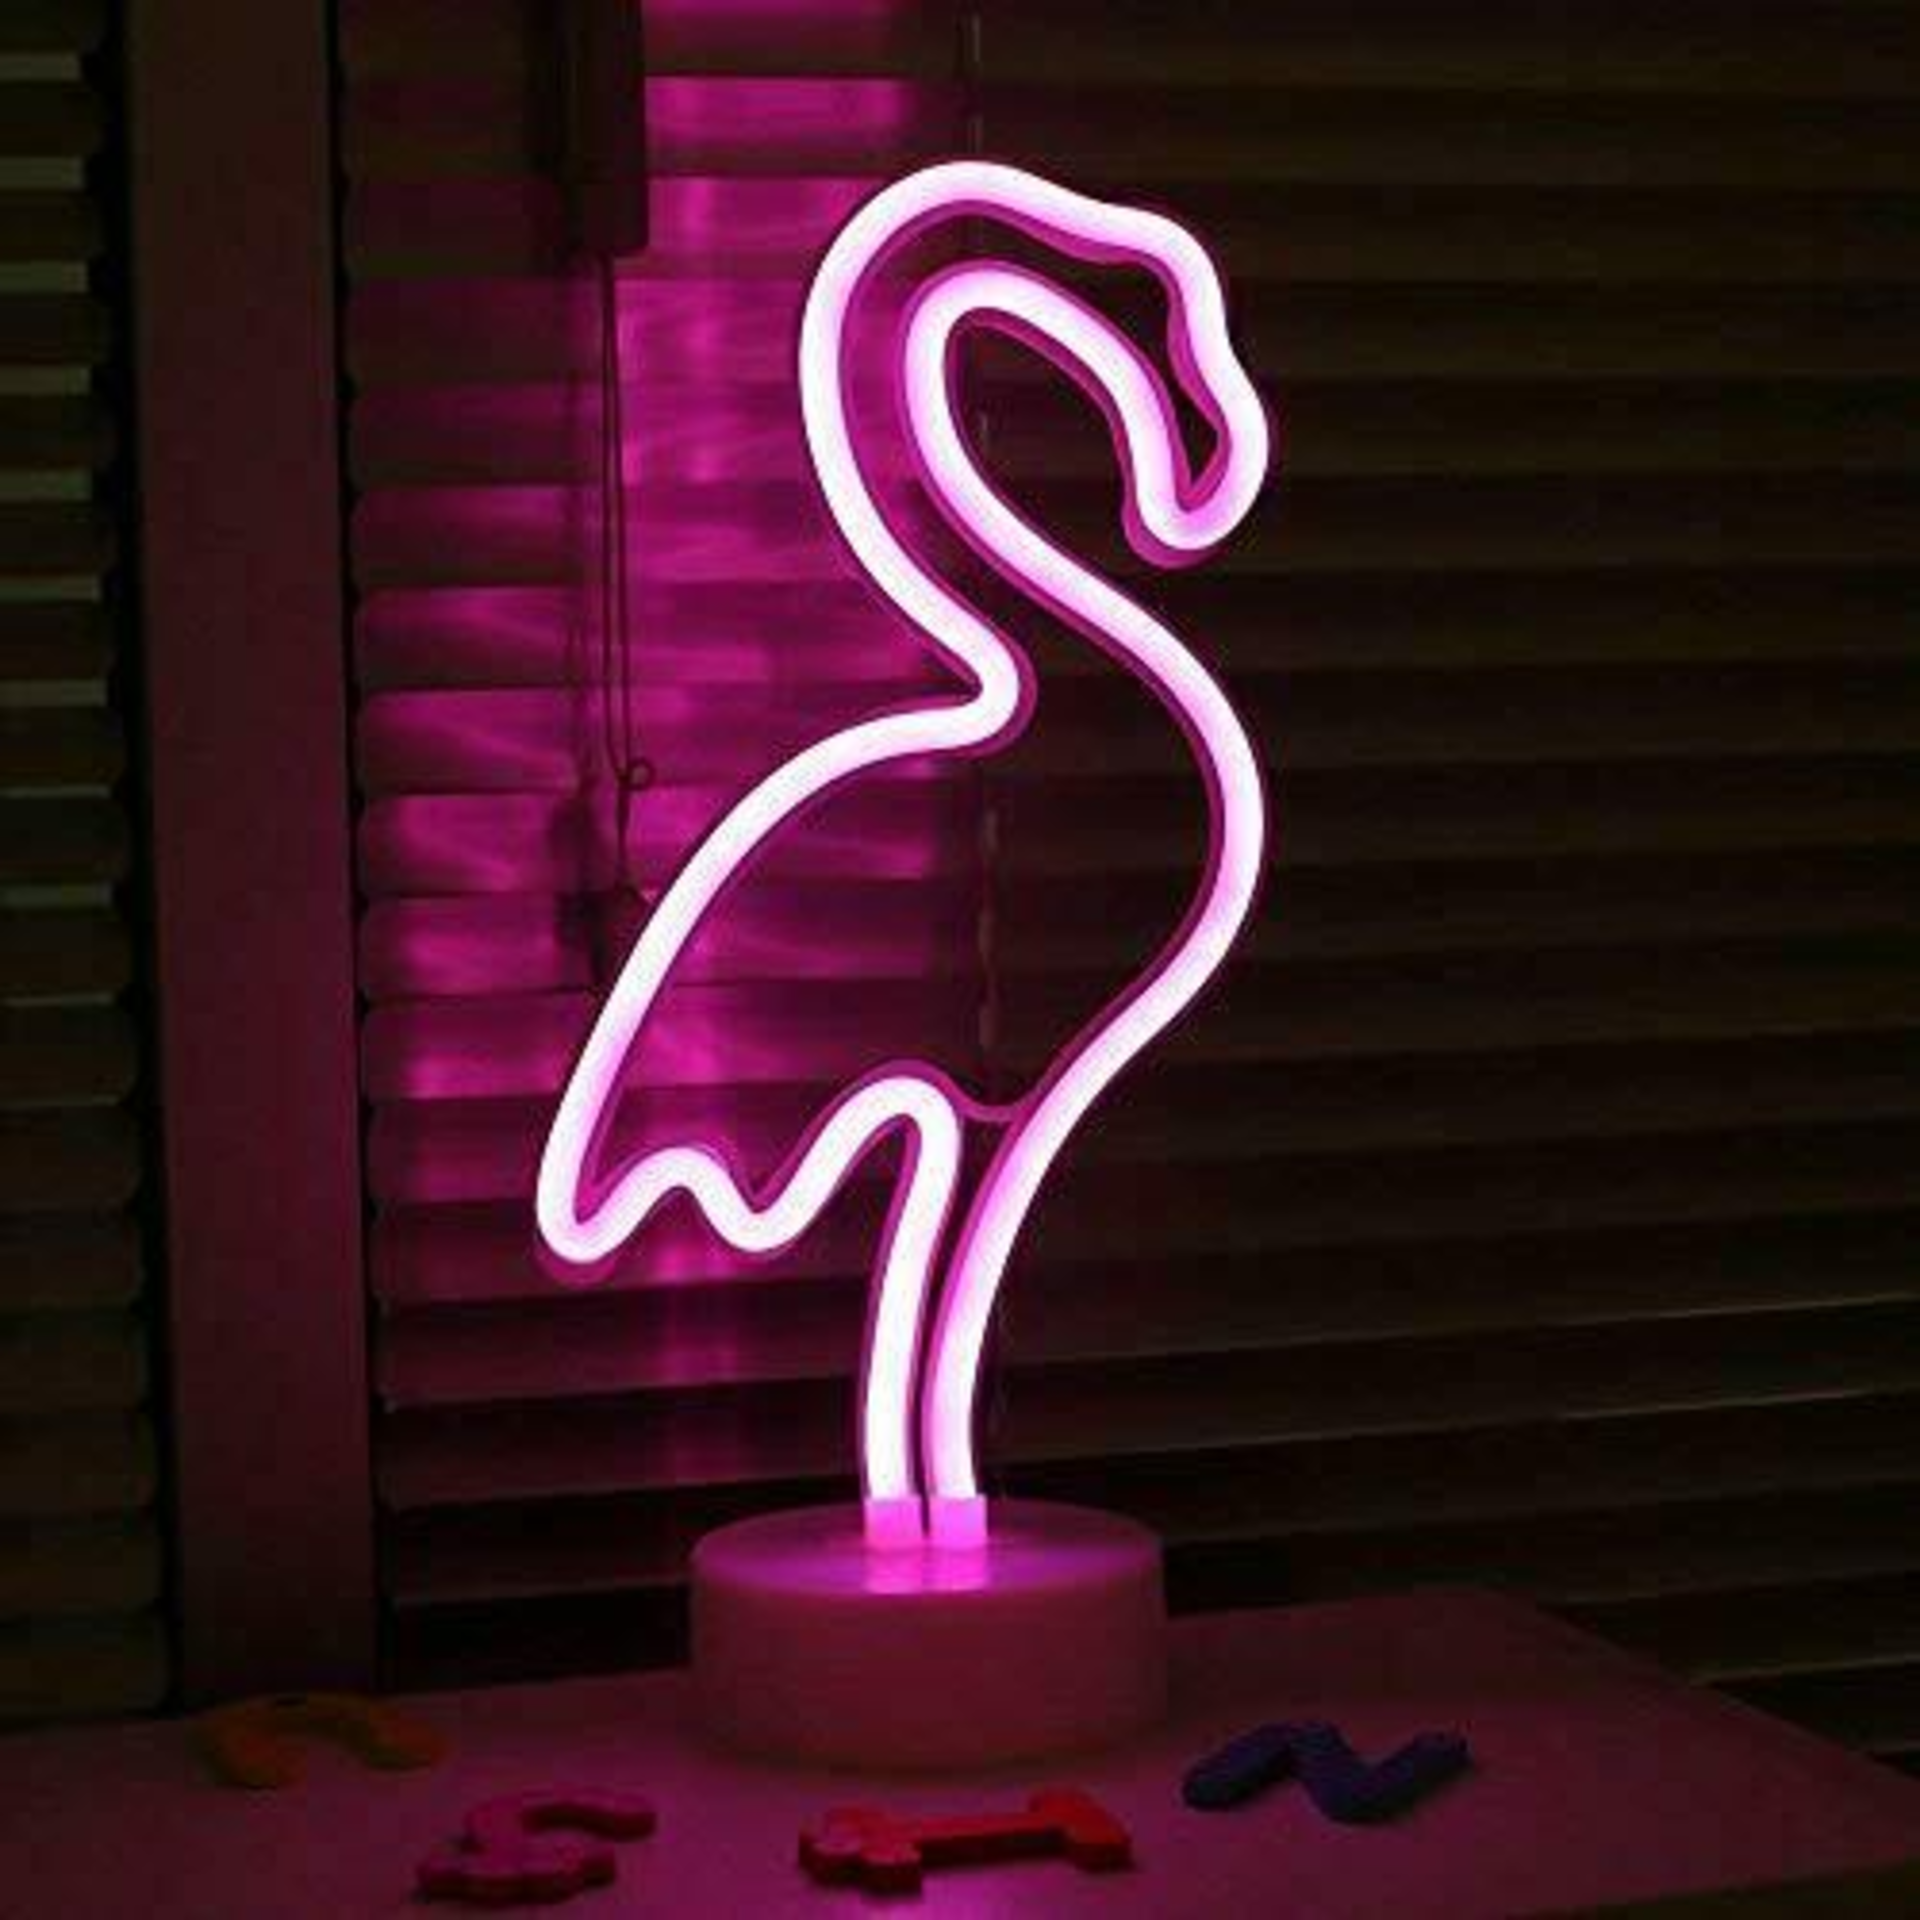 20 X BRAND NEW FLAMINGO NEON NIGHTLIGHTS - IN 1 OUTER BOX - RRP £12 (EBAY) / £15 (AMAZON) - REQUIRES - Image 3 of 3